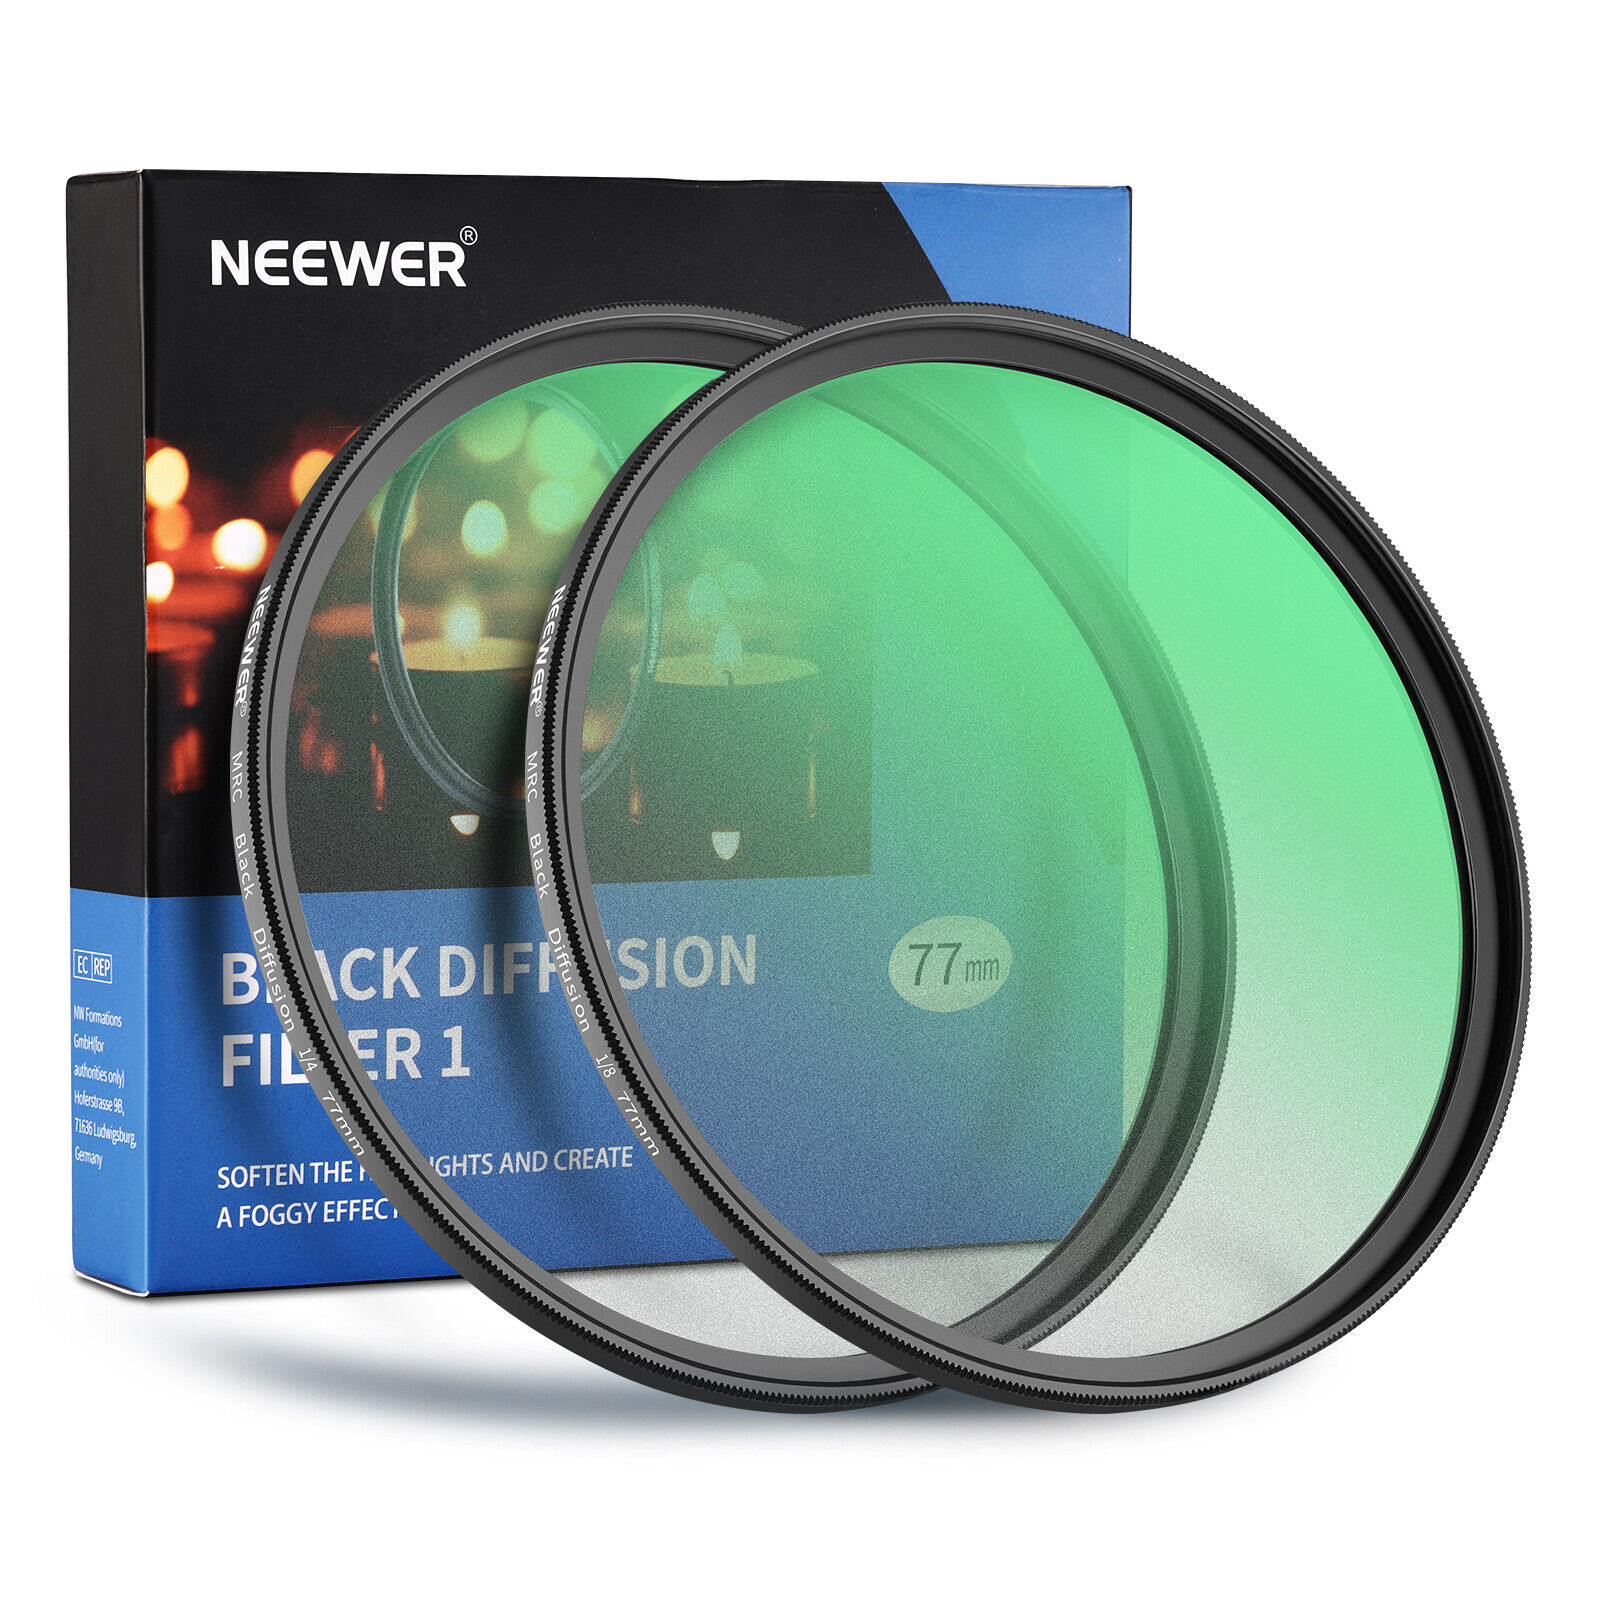 NEEWER 2 Pcs 77mm Black Diffusion 1/4 & 1/8 Mist Cinematic Effect Filters Kit